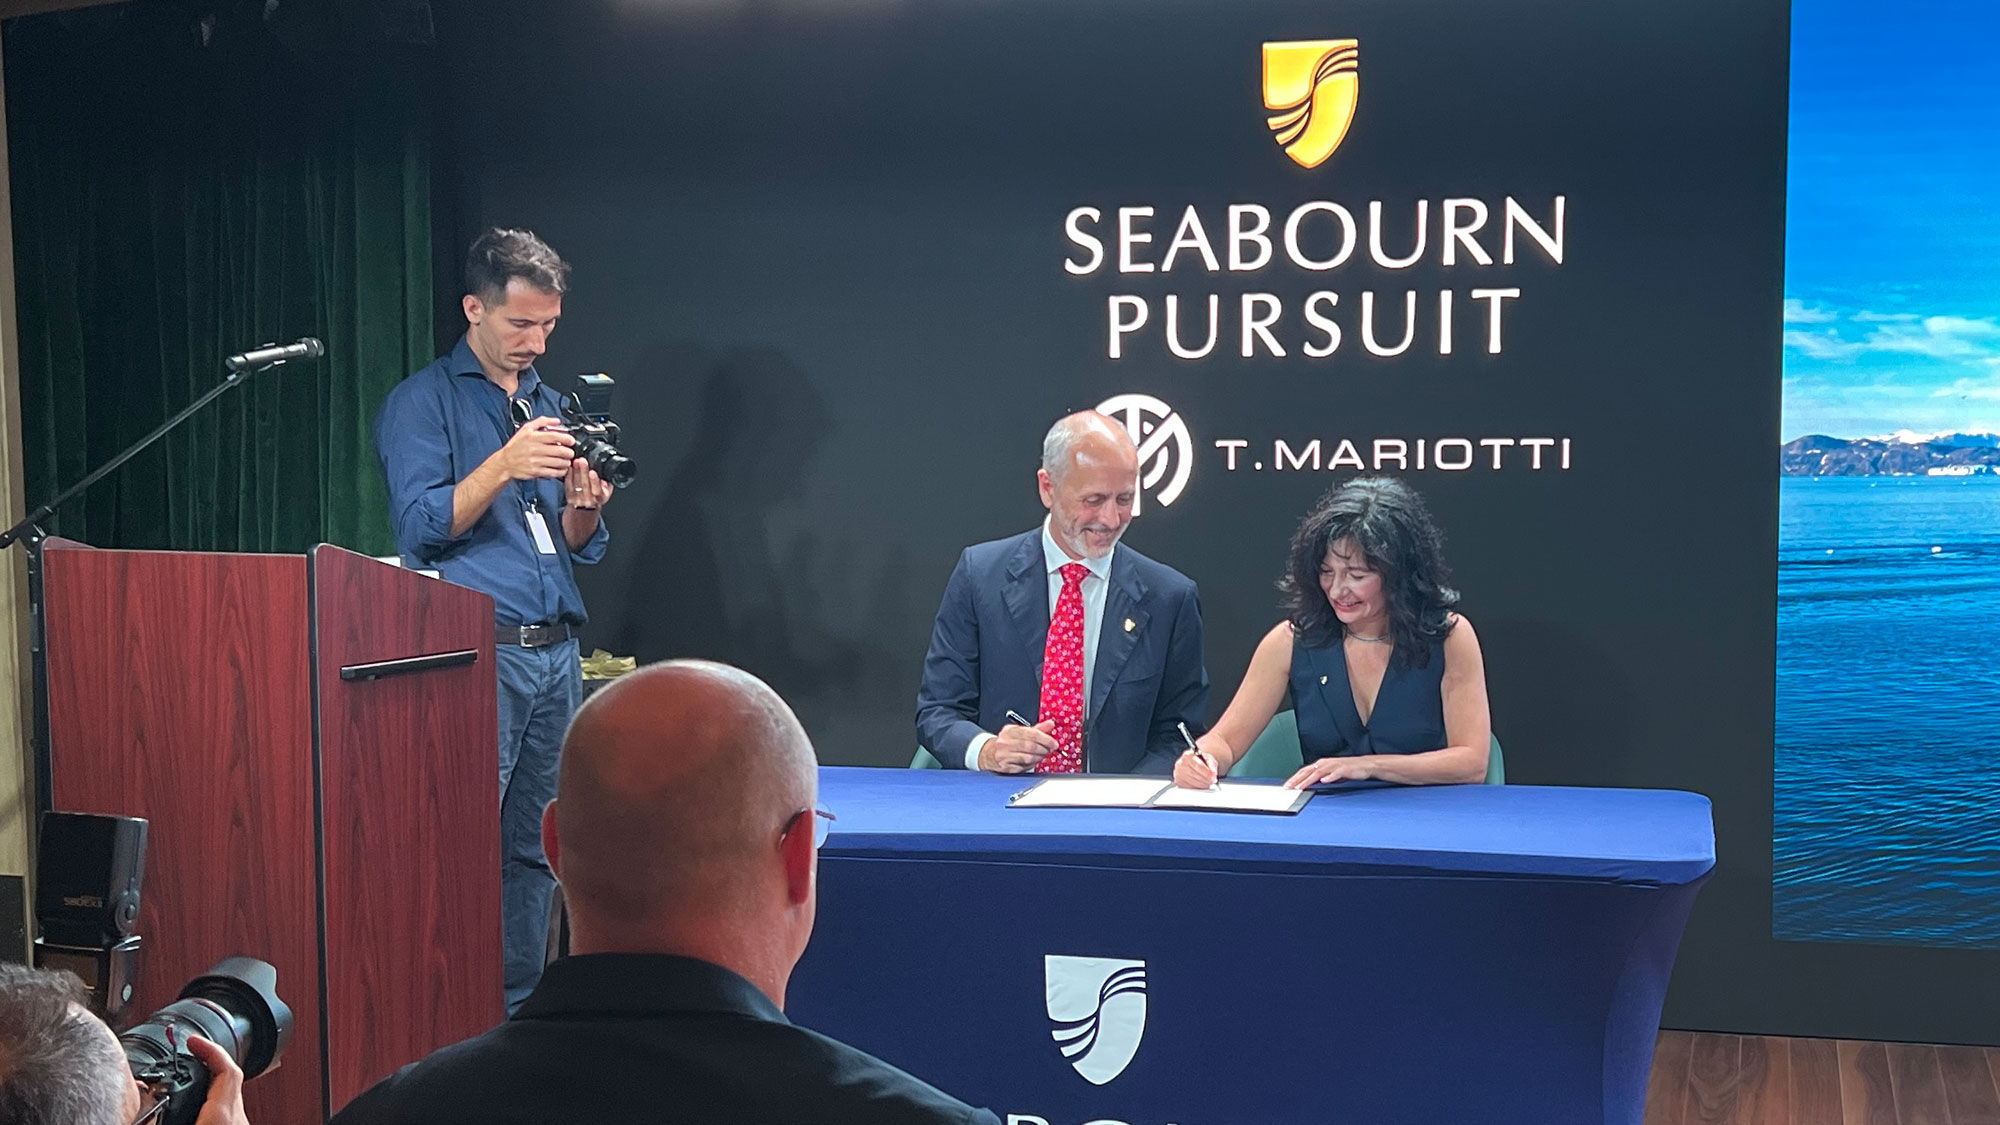 T. Mariotti managing director Marco Giglione and Seabourn president Natalya Leahy complete the handover process for the Seabourn Pursuit.